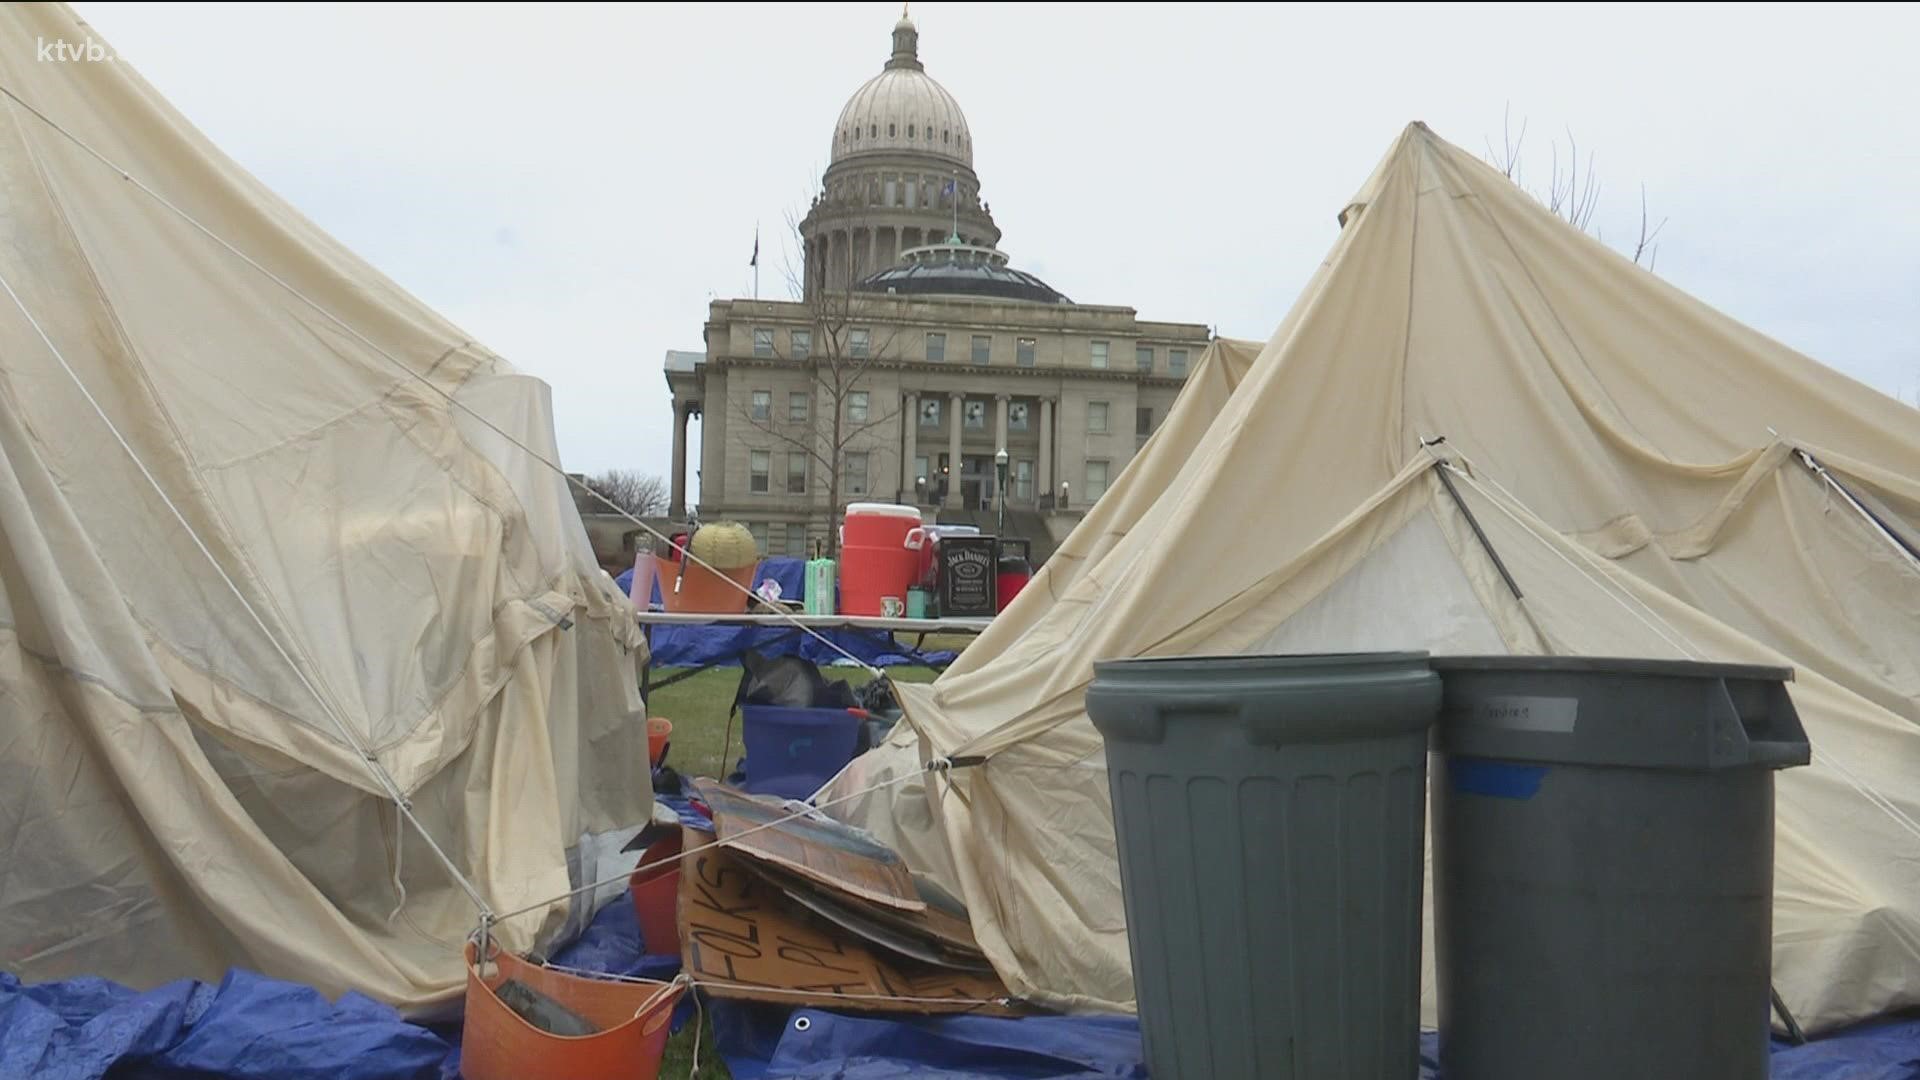 The demonstrators say they're trying to draw attention to a dire lack of housing, but the governor says the area contains "dangerous health and safety violations."